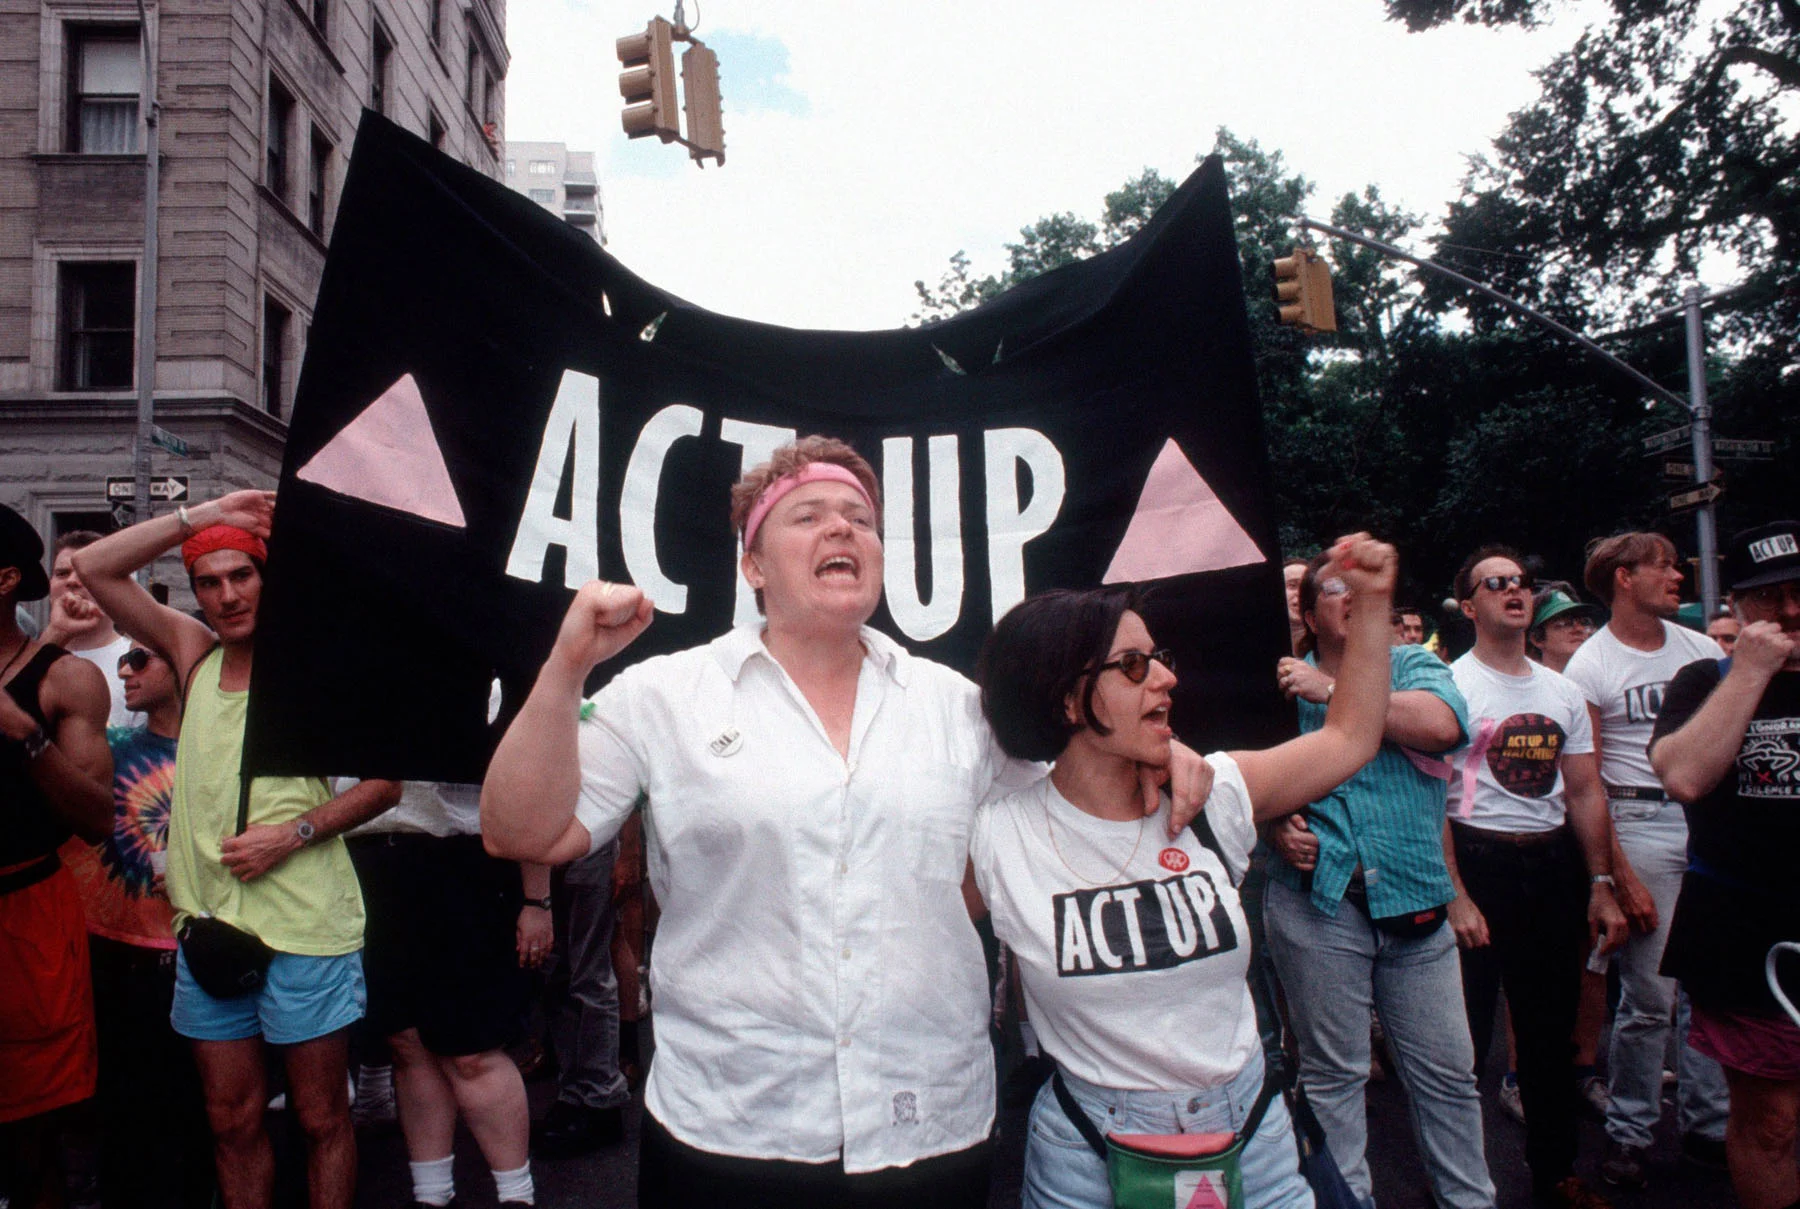 A color photograph of two people, one donning an ACT UP shirt, marching in front of a black ACT UP flag with two pink triangles on it, while a group of other protestors stands behind them. 